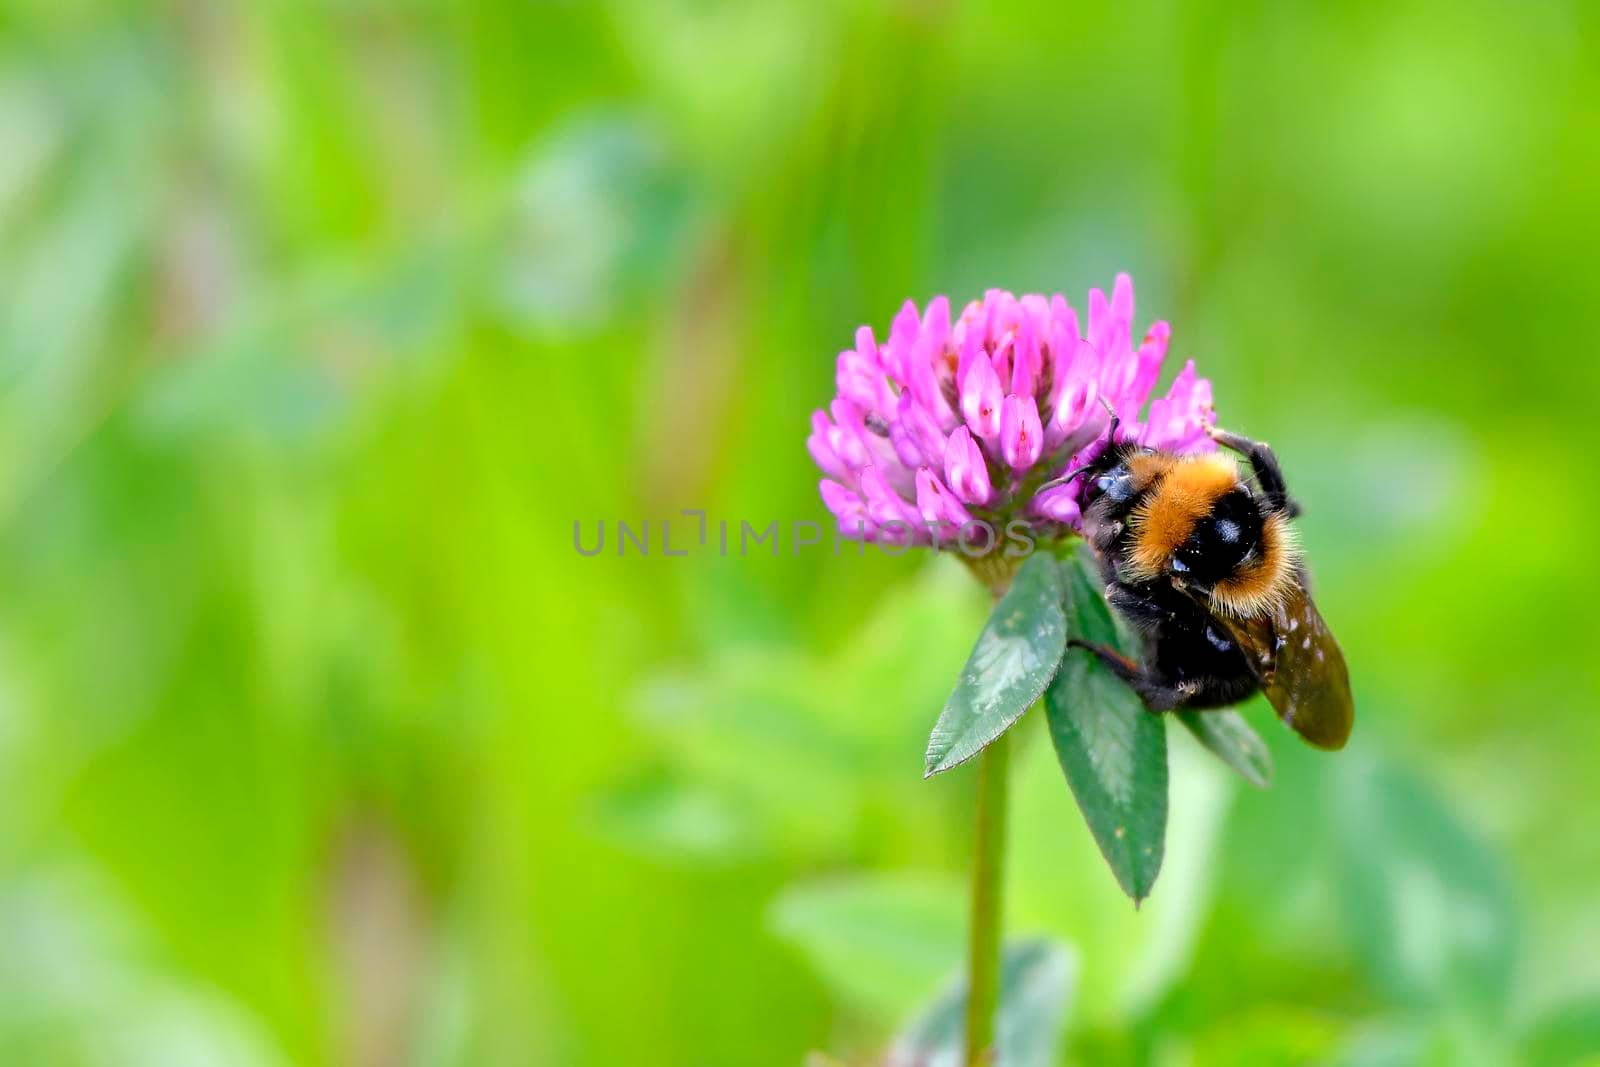 crimson clover with flower and red-tailed bumblebee by Jochen